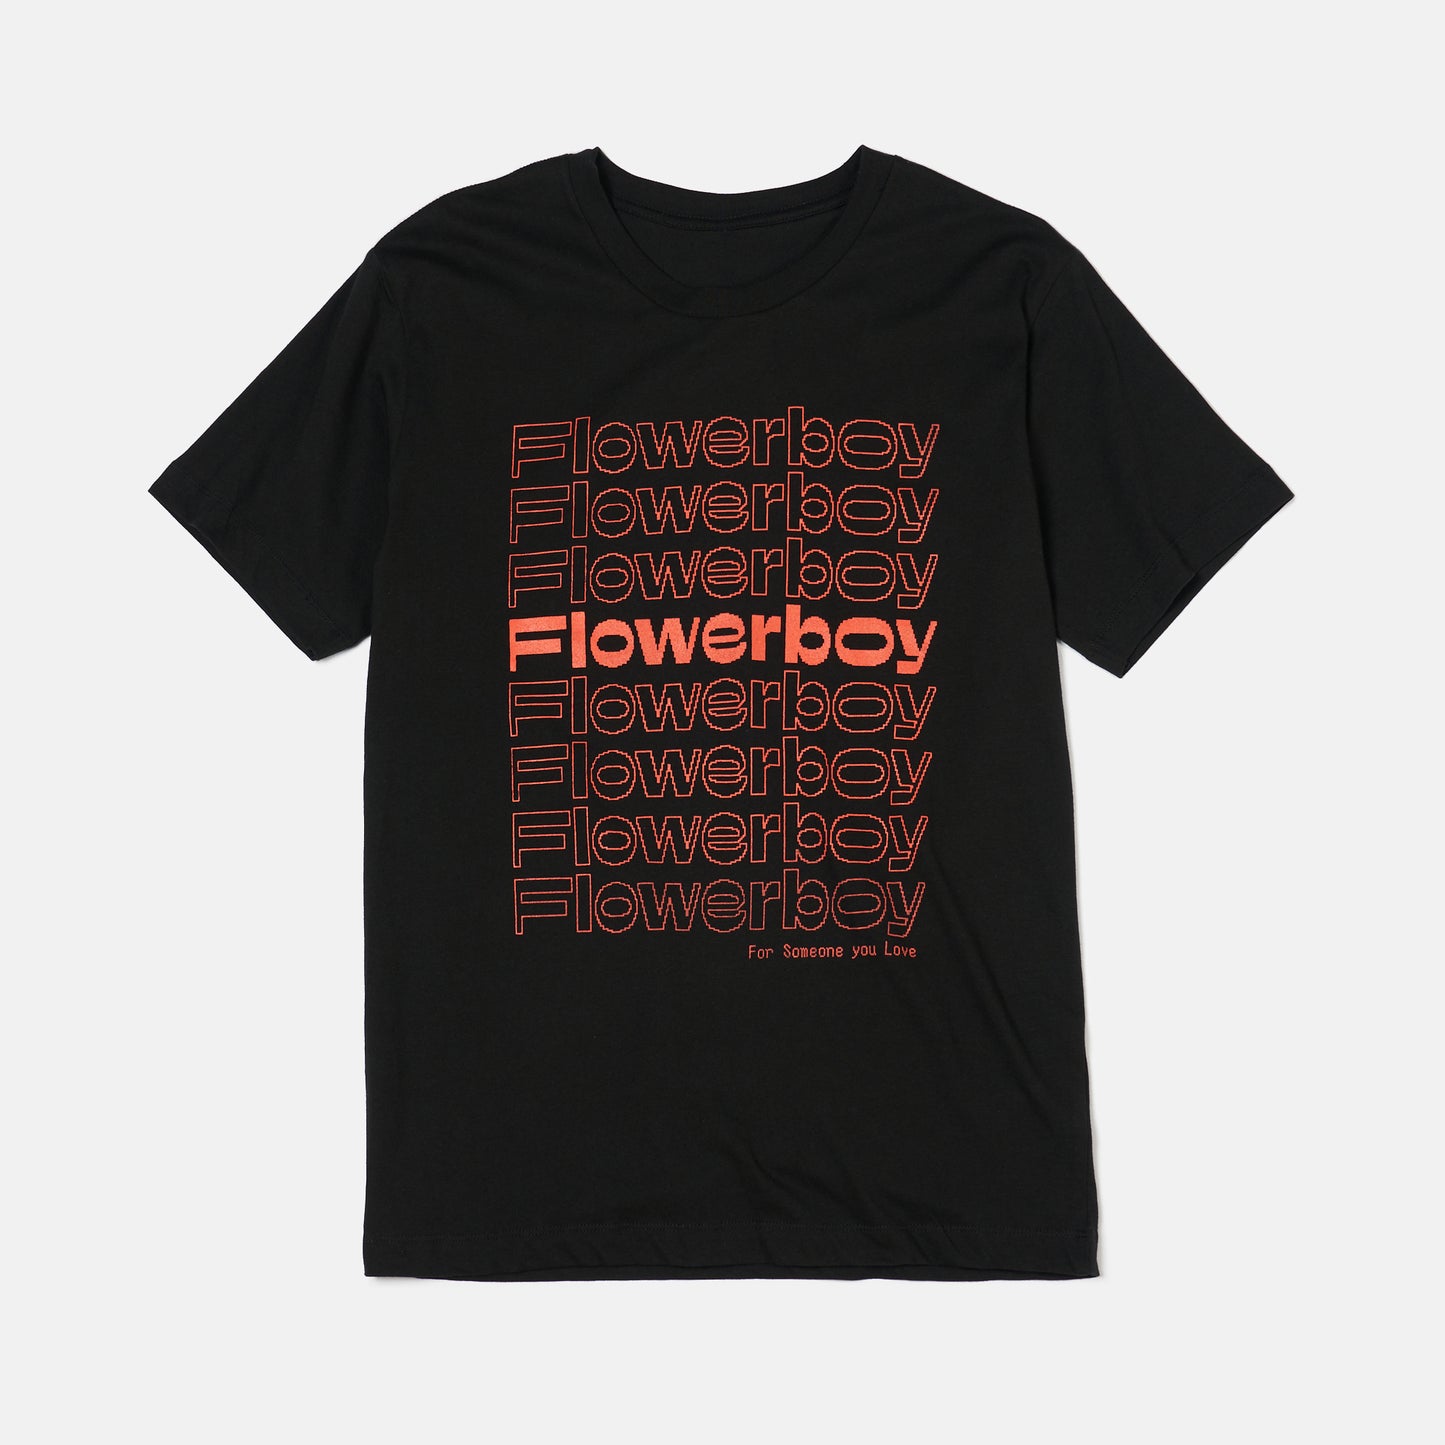 Flowerboy Project Black & Red Tee - Front